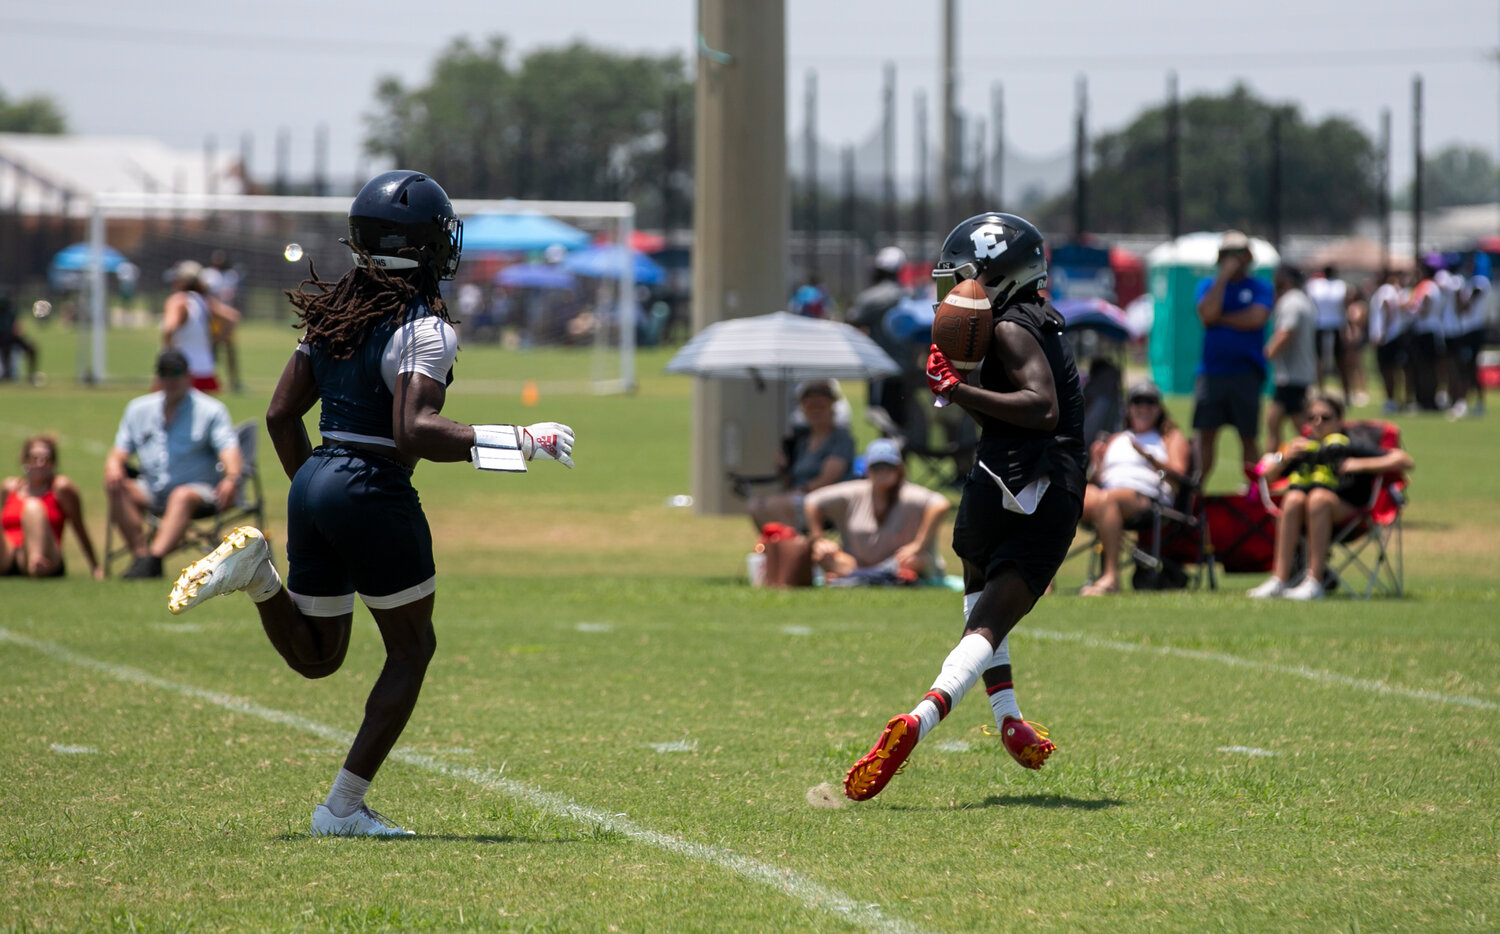 Elberta sophomore Adrian Billups reaches back to secure a catch and scamper in for a touchdown during the Warriors’ first-round bracket game against the Gulf Shores Dolphins on Thursday, June 29, at the Foley Sports Tourism Complex as part of the Lions’ 7-on-7 Showdown.